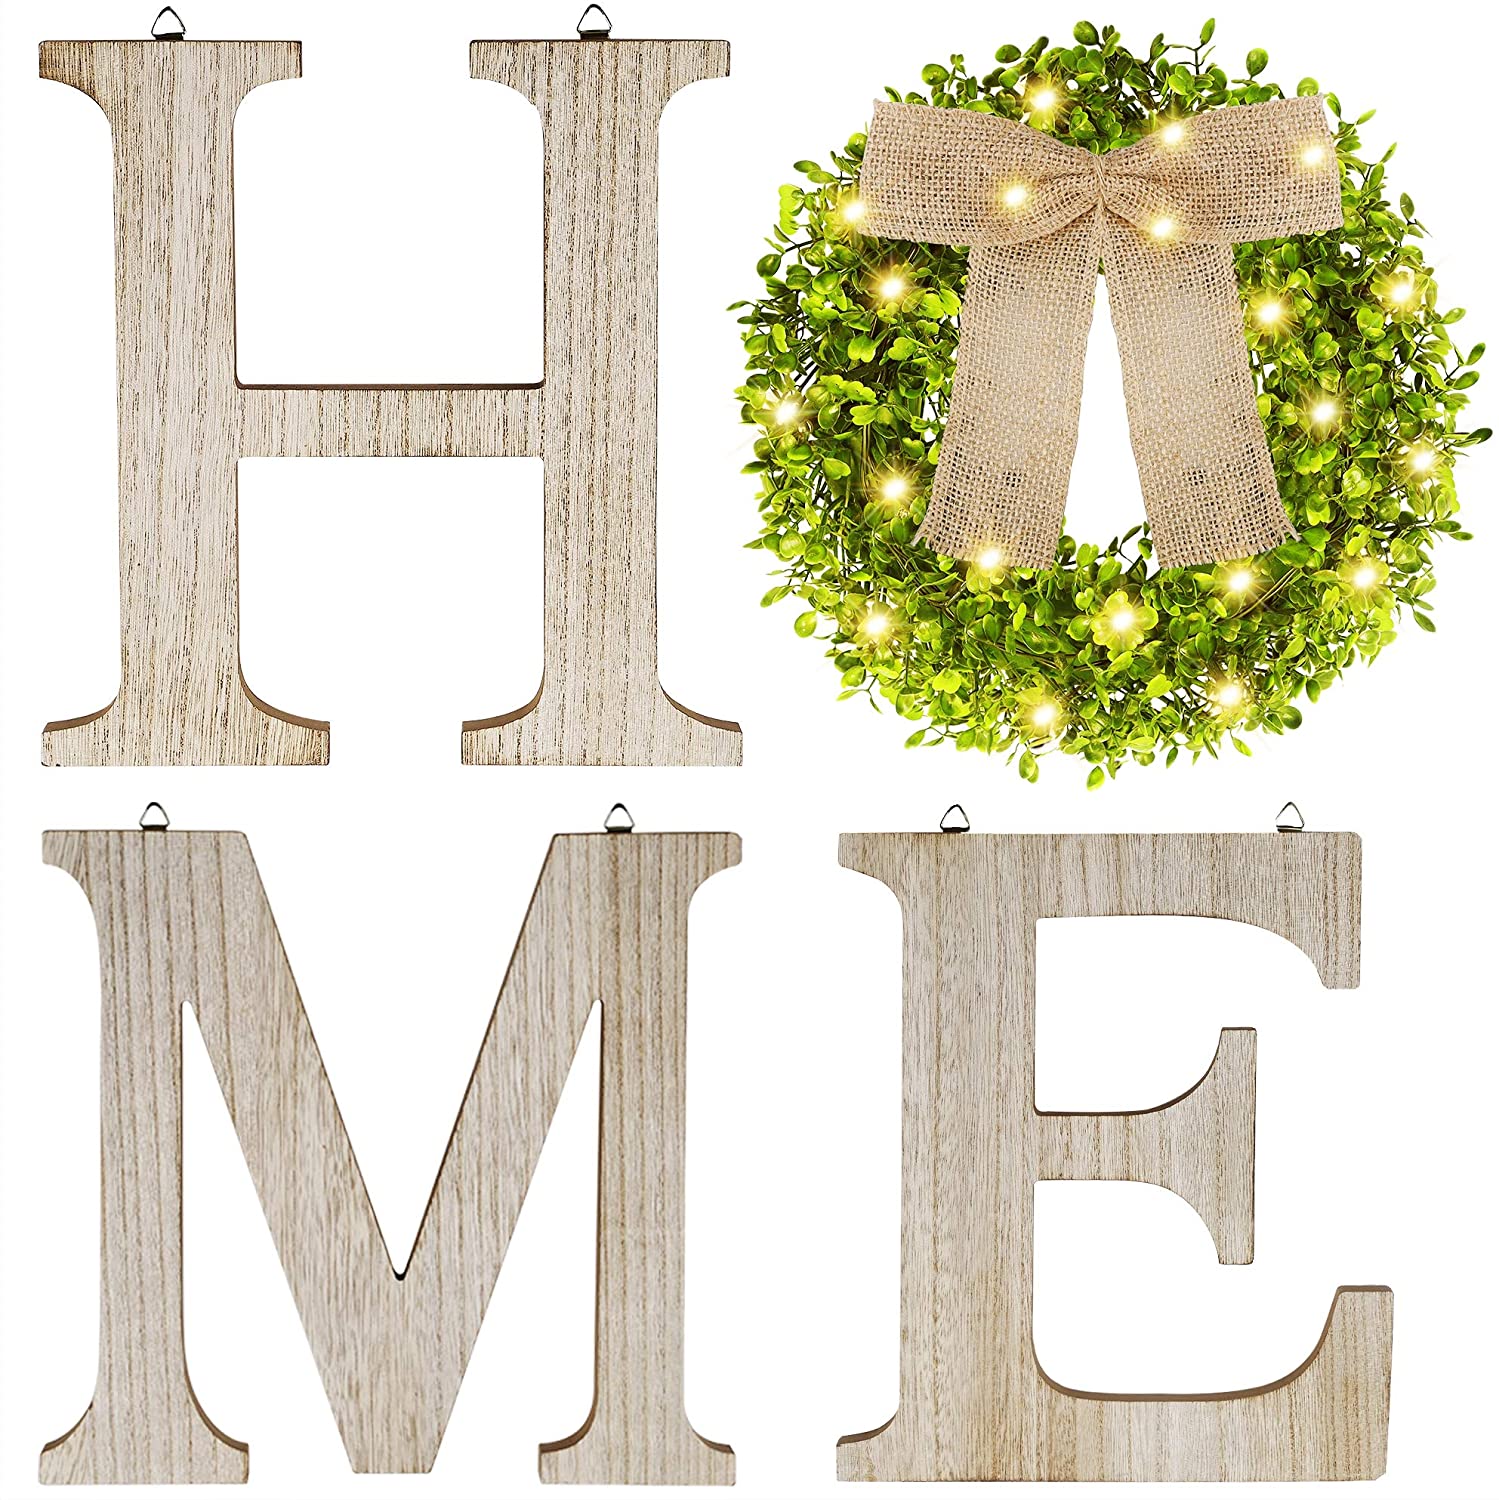 SAND MINE Wooden Home Signs, Farmhouse Home Decor Wall, Rustic Home Letters Decor with Lighted Artificial Eucalyptus Wreath, Wall Decorative Hanging Sign for Bedroom Living Room Enterway